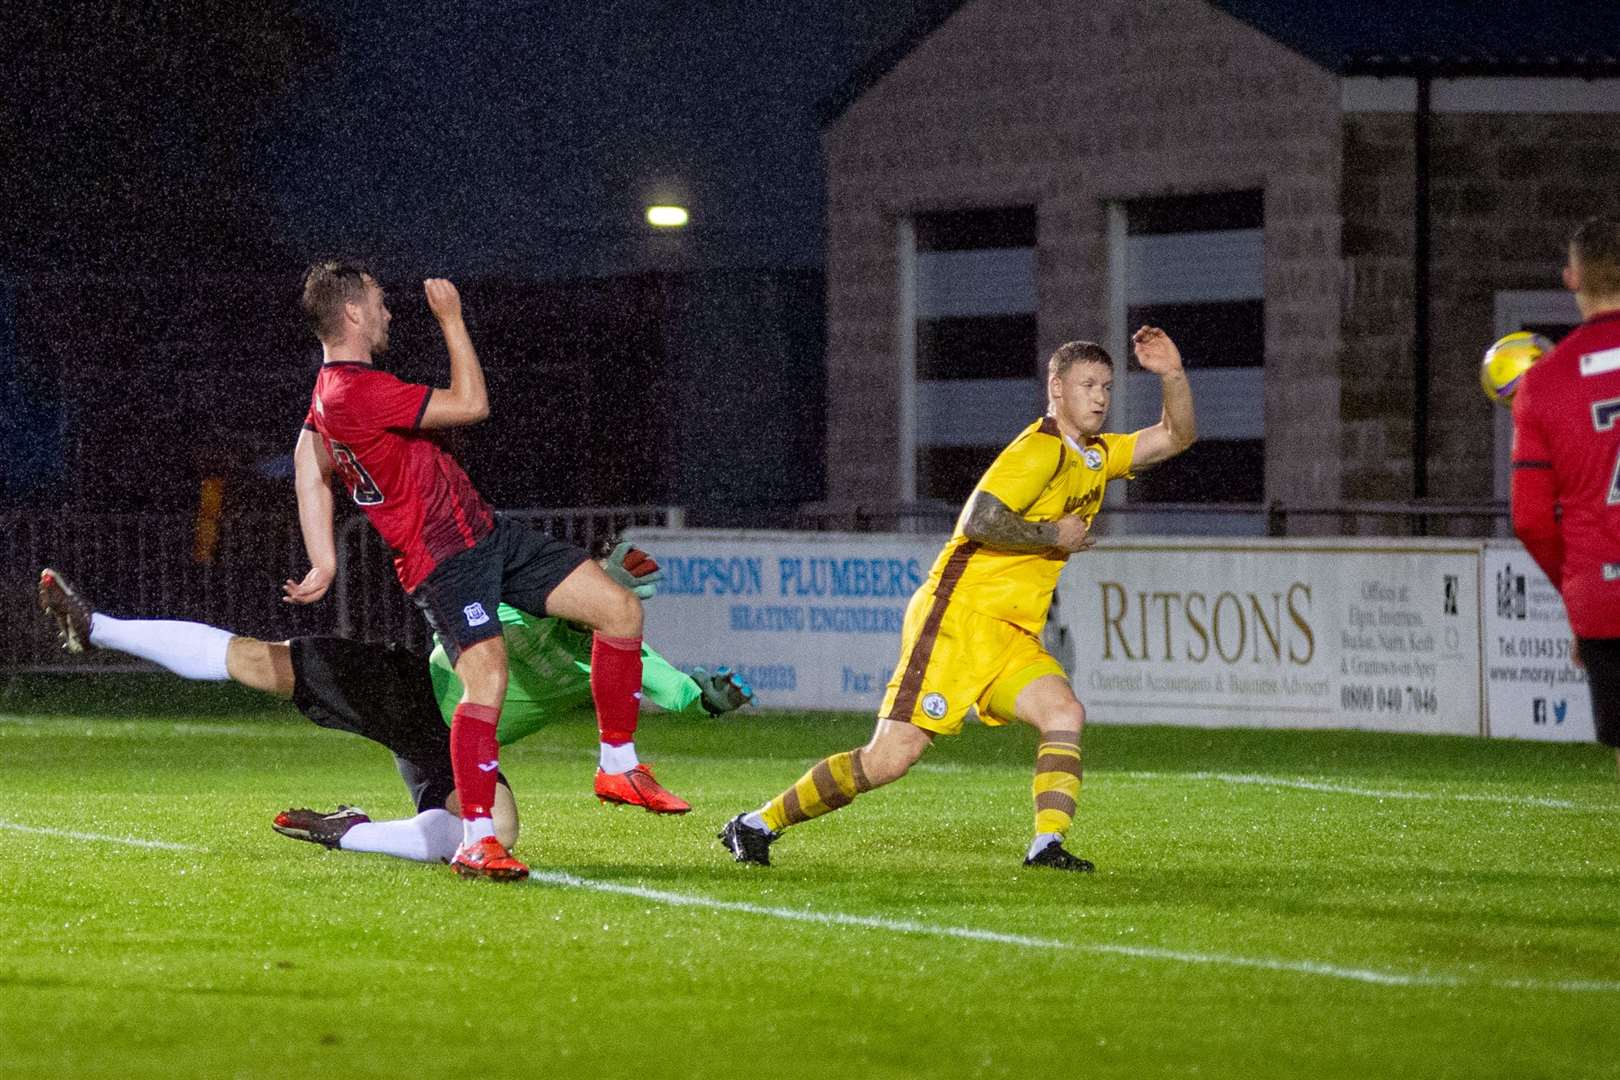 A simple finish for Josh Peters makes it 2-0 to Elgin City as he fires past Stuart Knight and Graham Fraser. ..Elgin City FC (4) vs Forres Mechanics FC (1) pre-season friendly match at Borough Briggs, Elgin 15/09/2020...Picture: Daniel Forsyth..